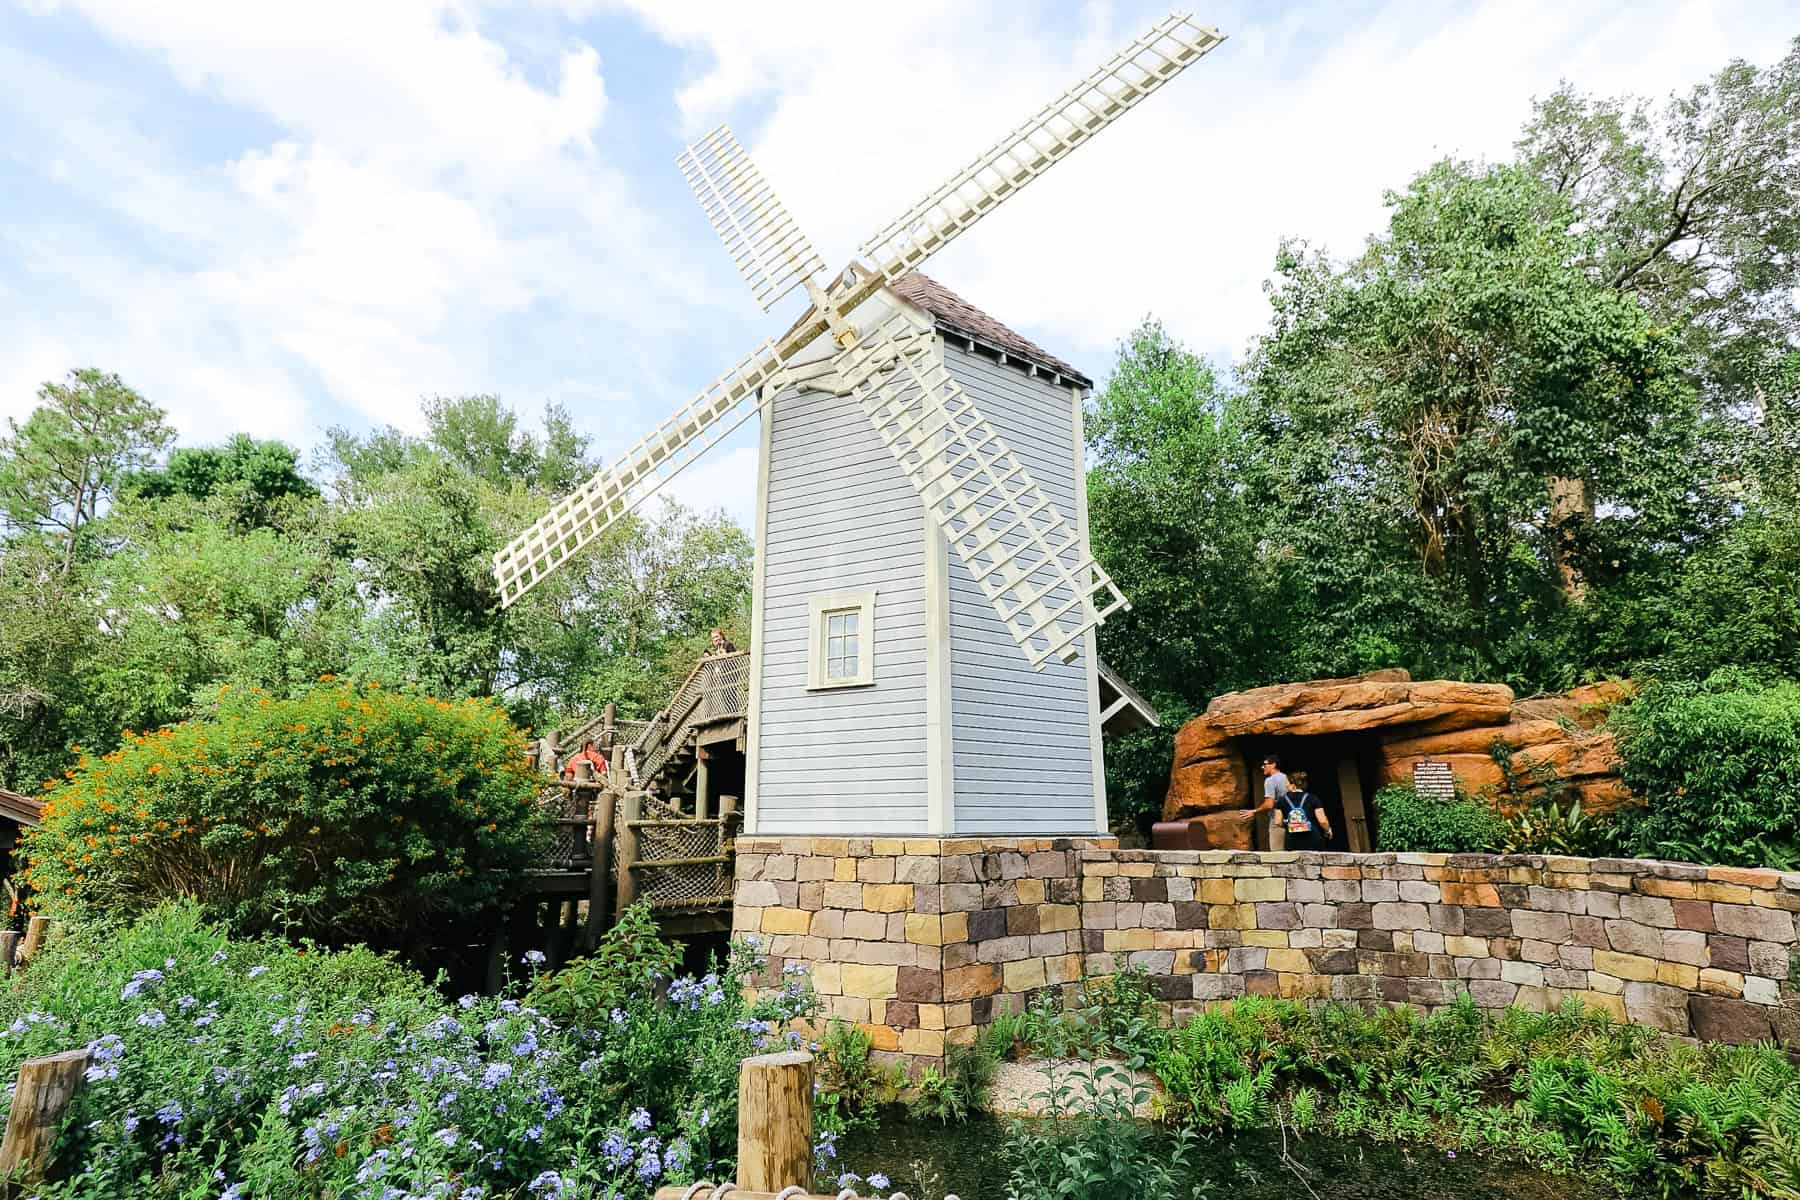 A windmill at the front of the Tom Sawyer Island attraction at Magic Kingdom. 